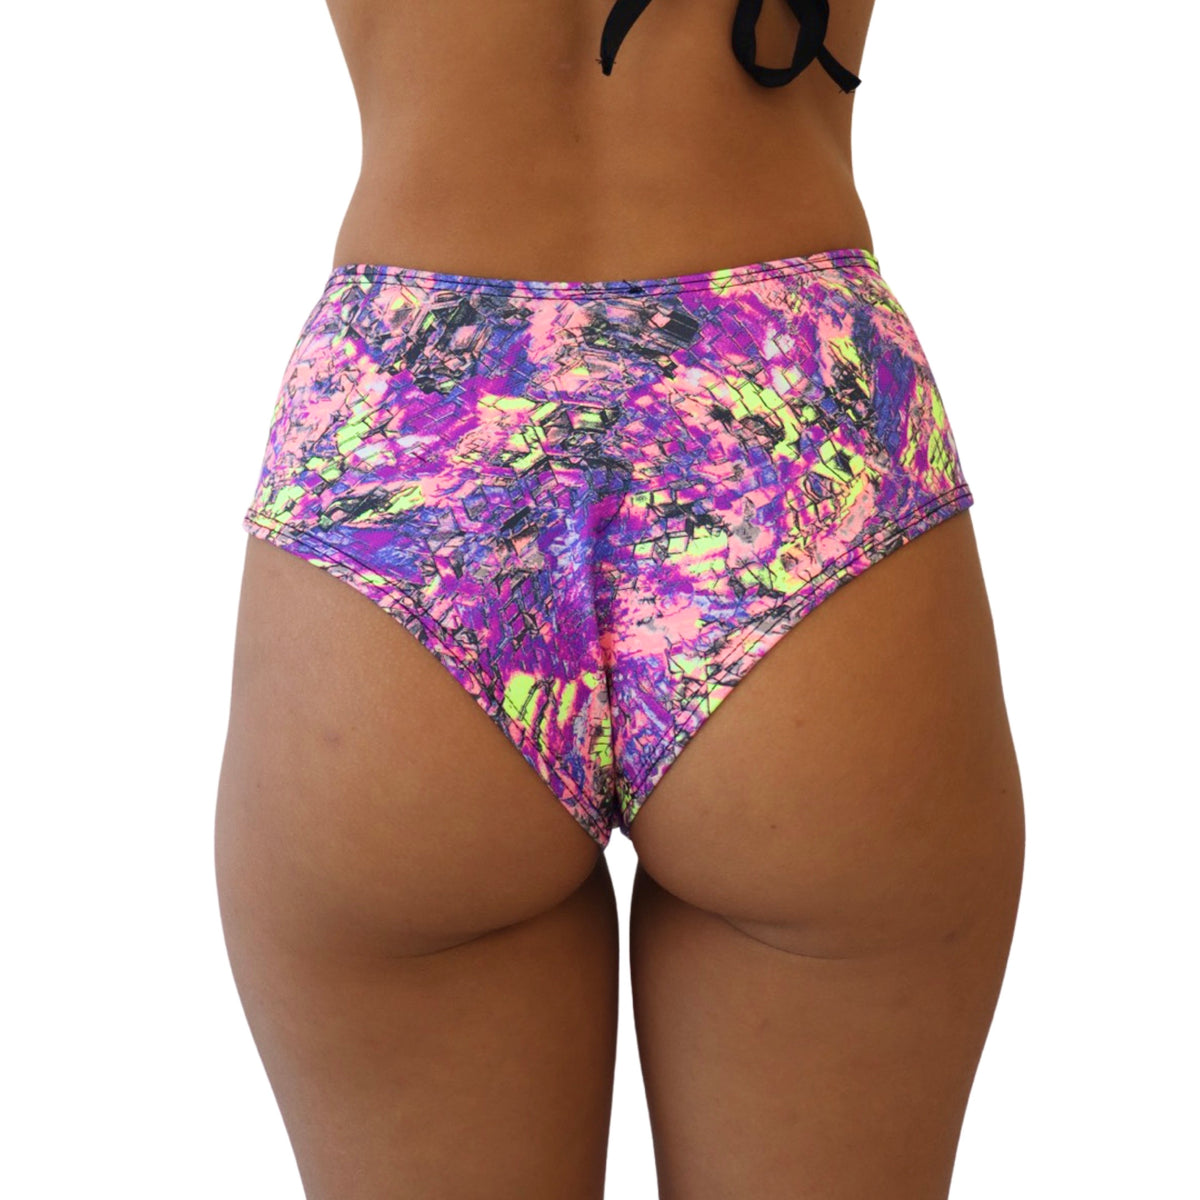 LOST FREQUENCY PURPLE CHEEKY BOTTOM